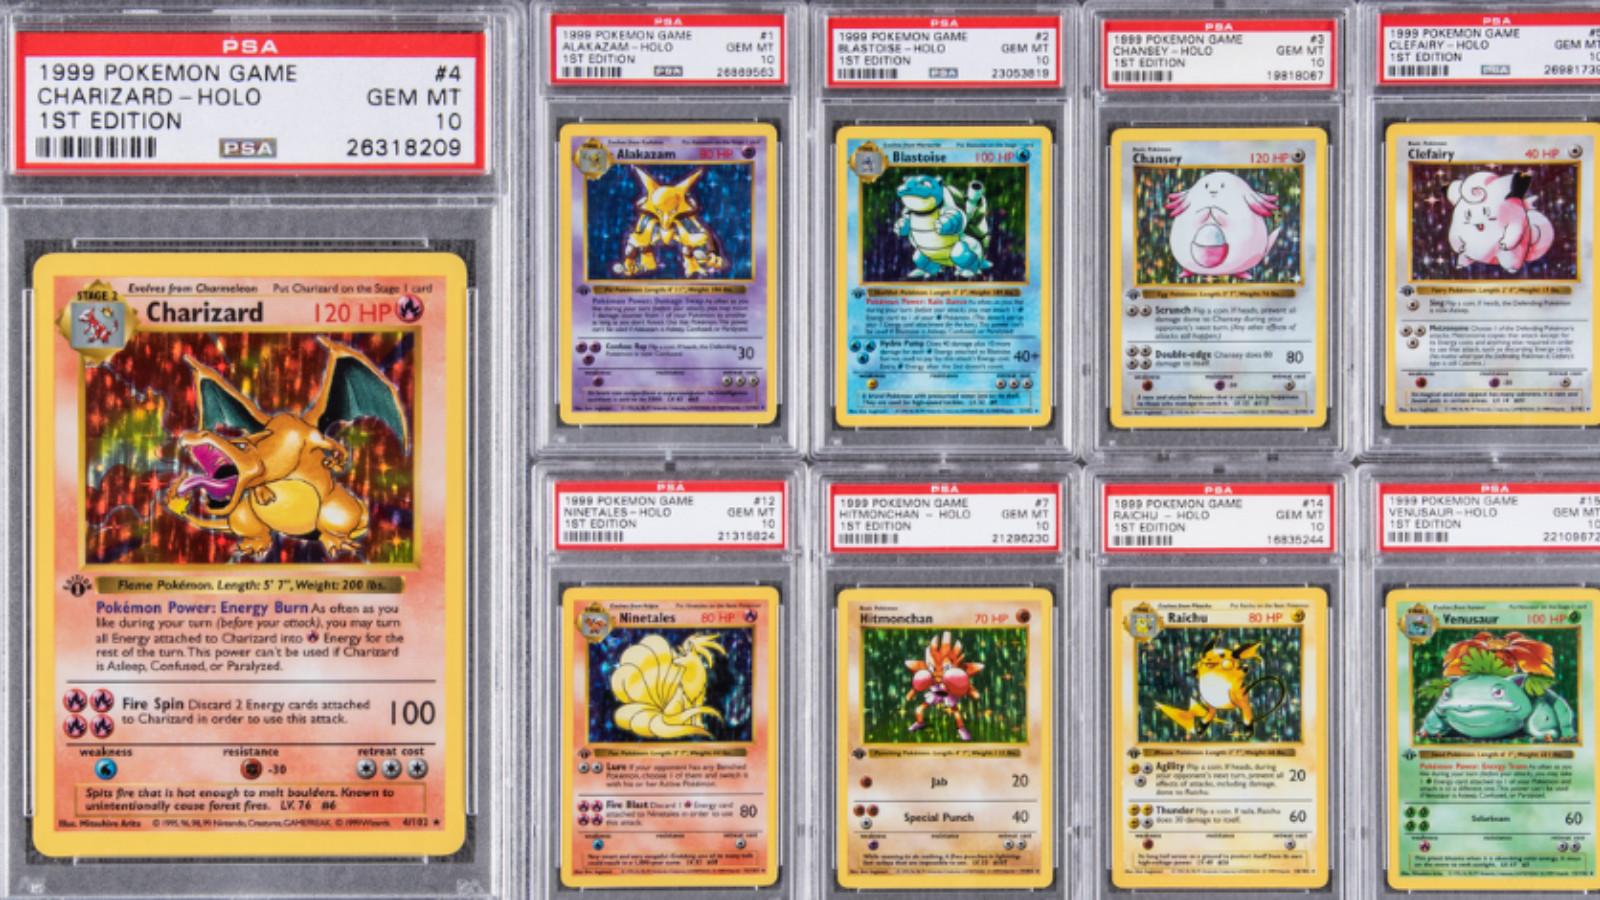 Complete First-Edition PSA10 Pokemon card set could sell for over